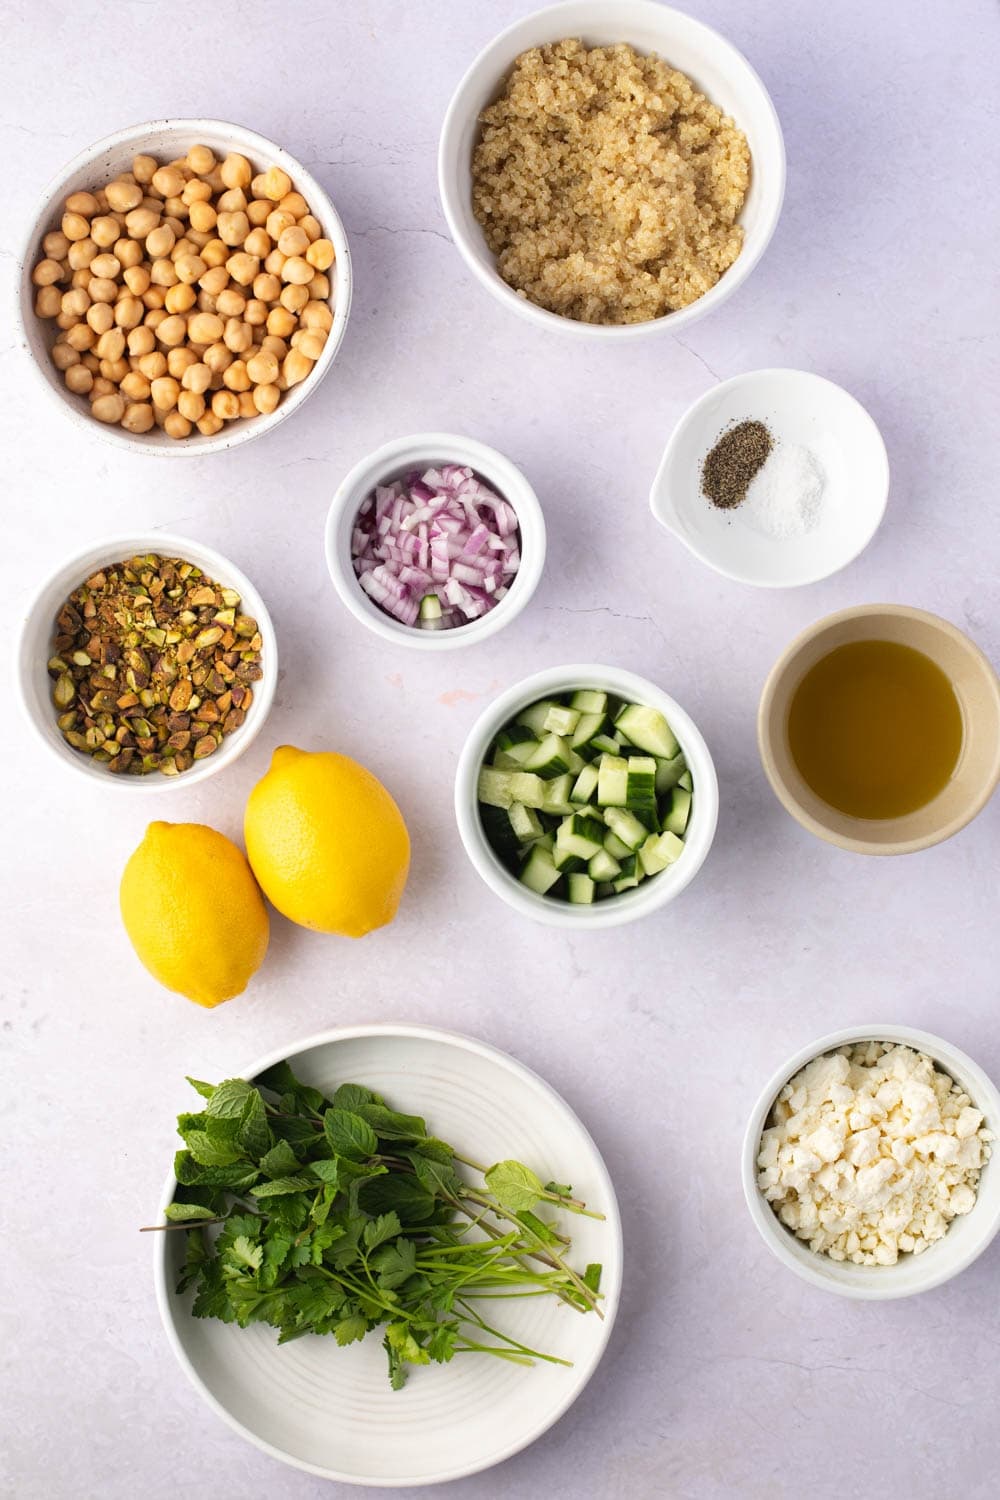 Jennifer Aniston Salad Ingredients - Quinoa, Cucumber, Parsley, Mint, Onion, Pistachios, Chickpeas and Feta Cheese